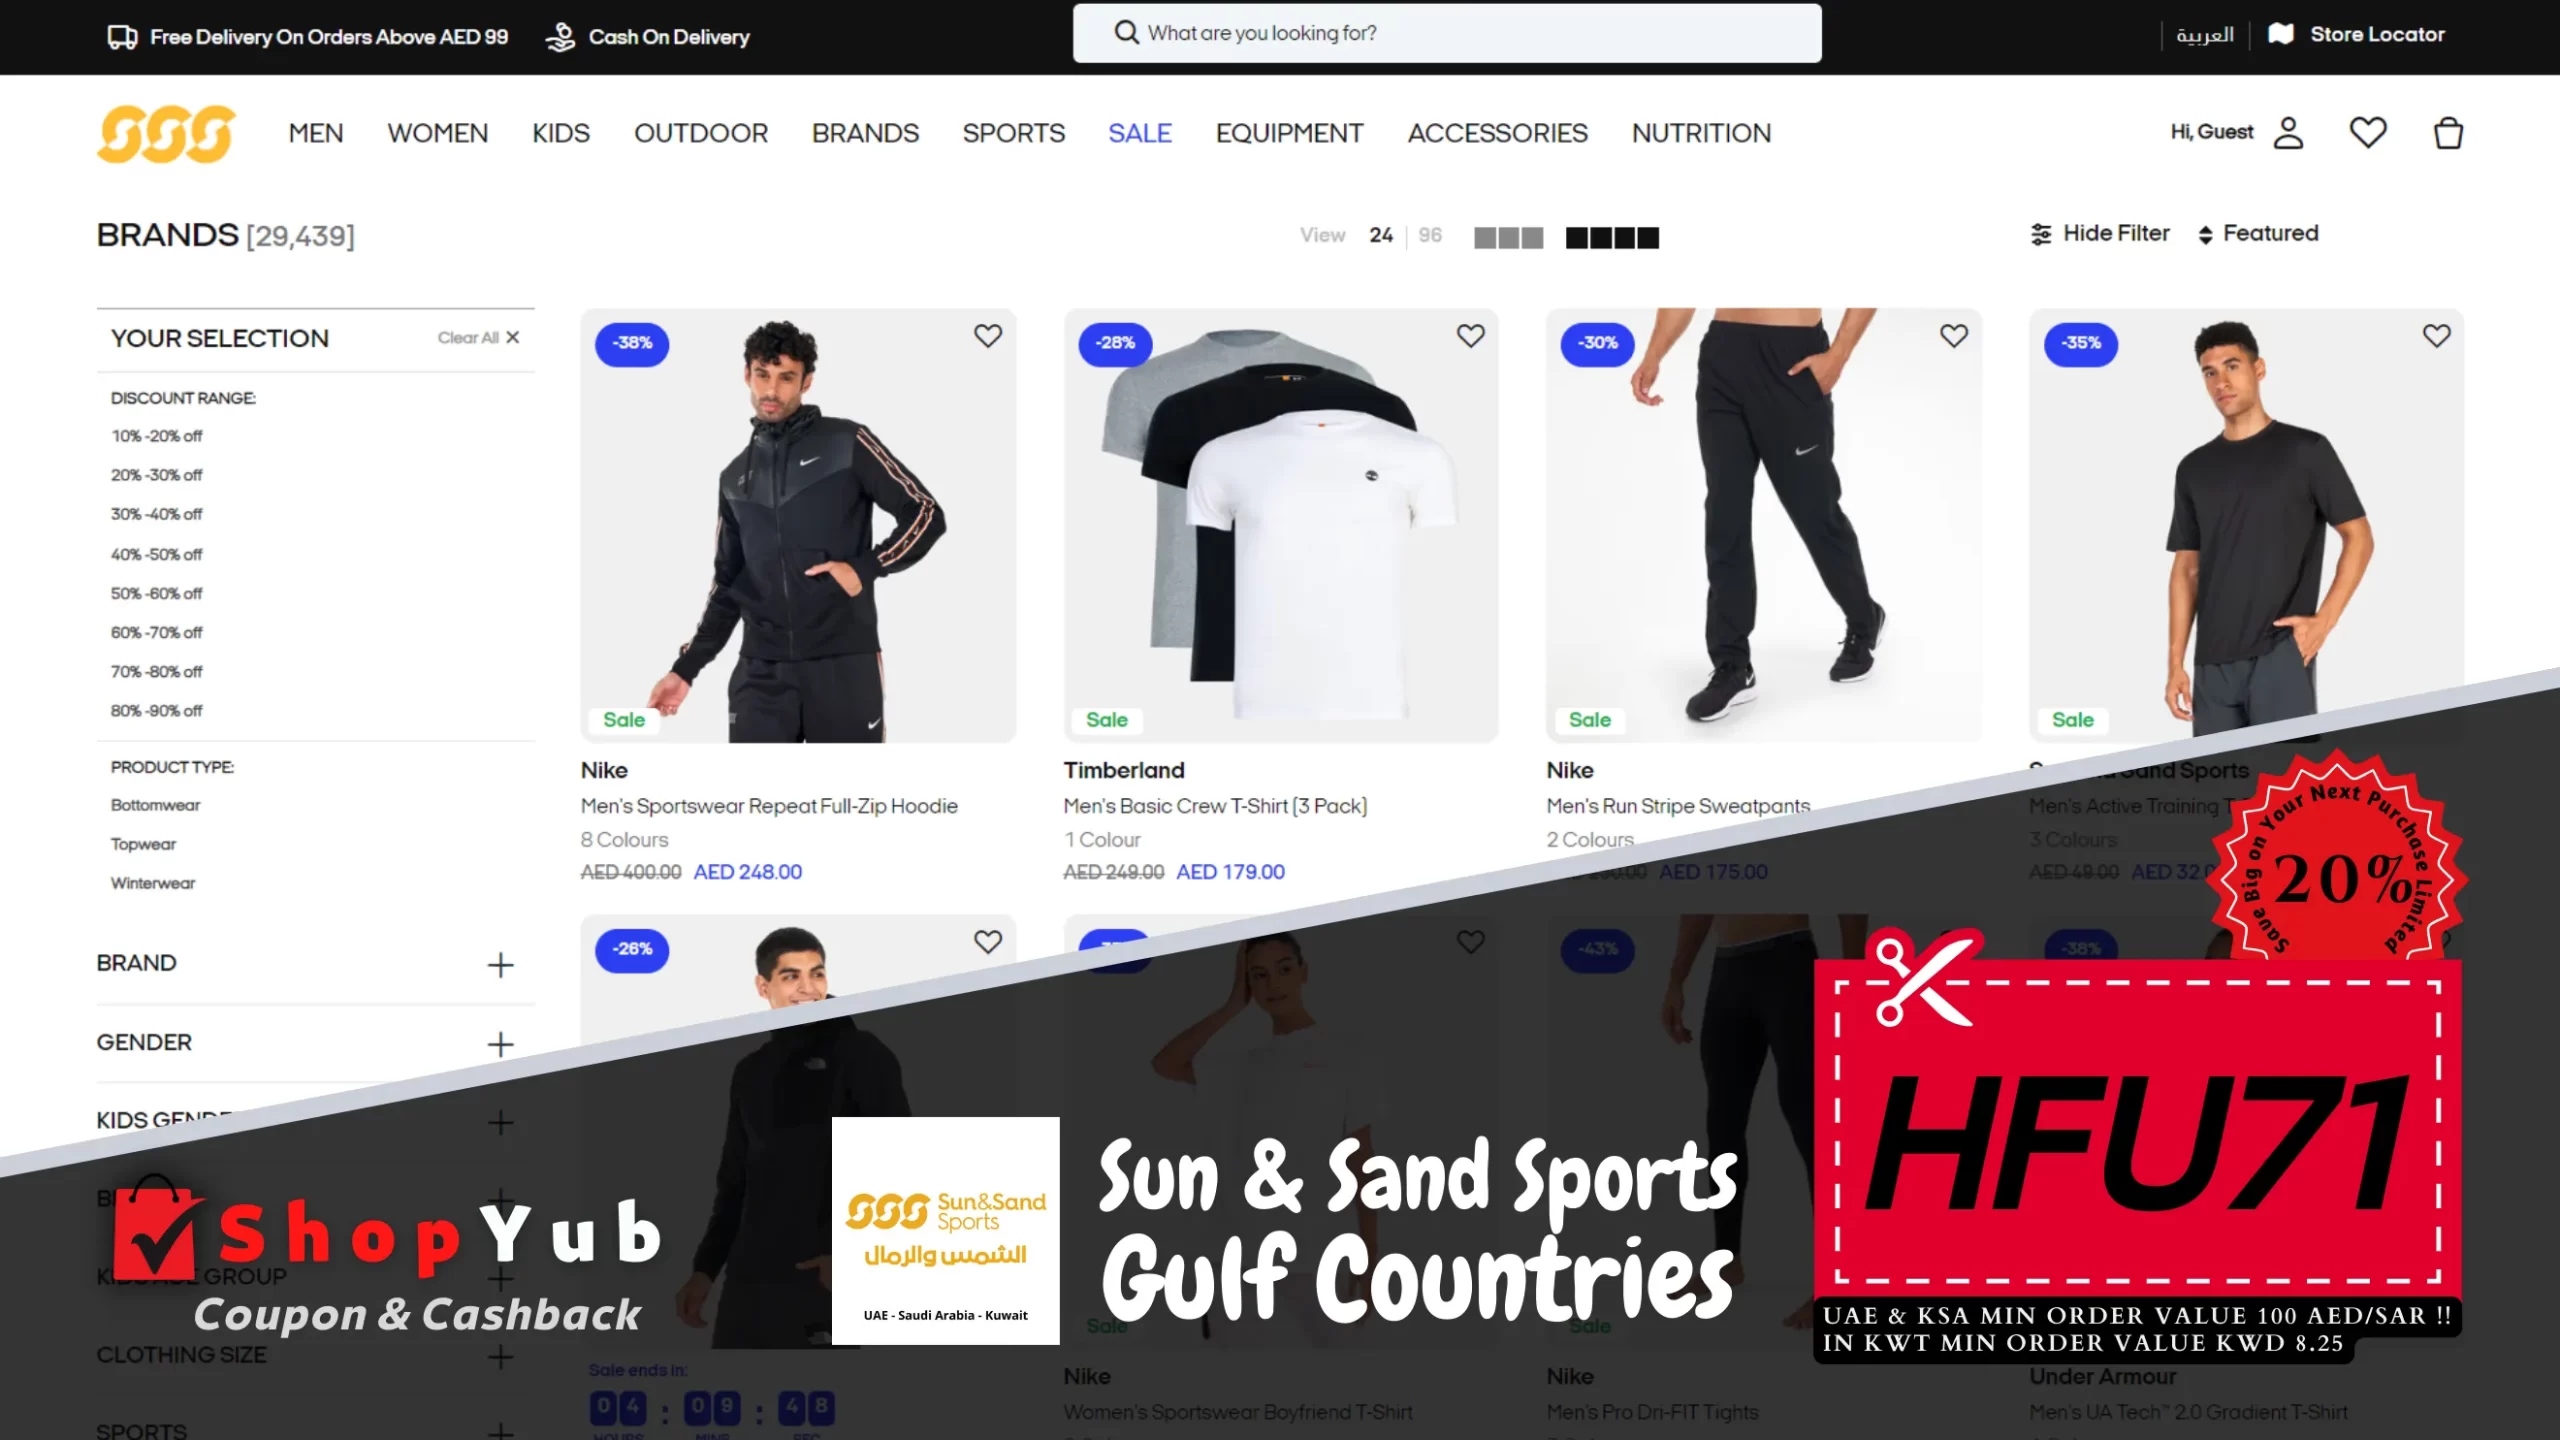 Use Sun & Sand Sports Coupon Code: HFU71 | Verified Sun & Sand Sports Coupons for KWT | 15% Off Sun & Sand Sports Discount Codes Fashion online | March 2024.